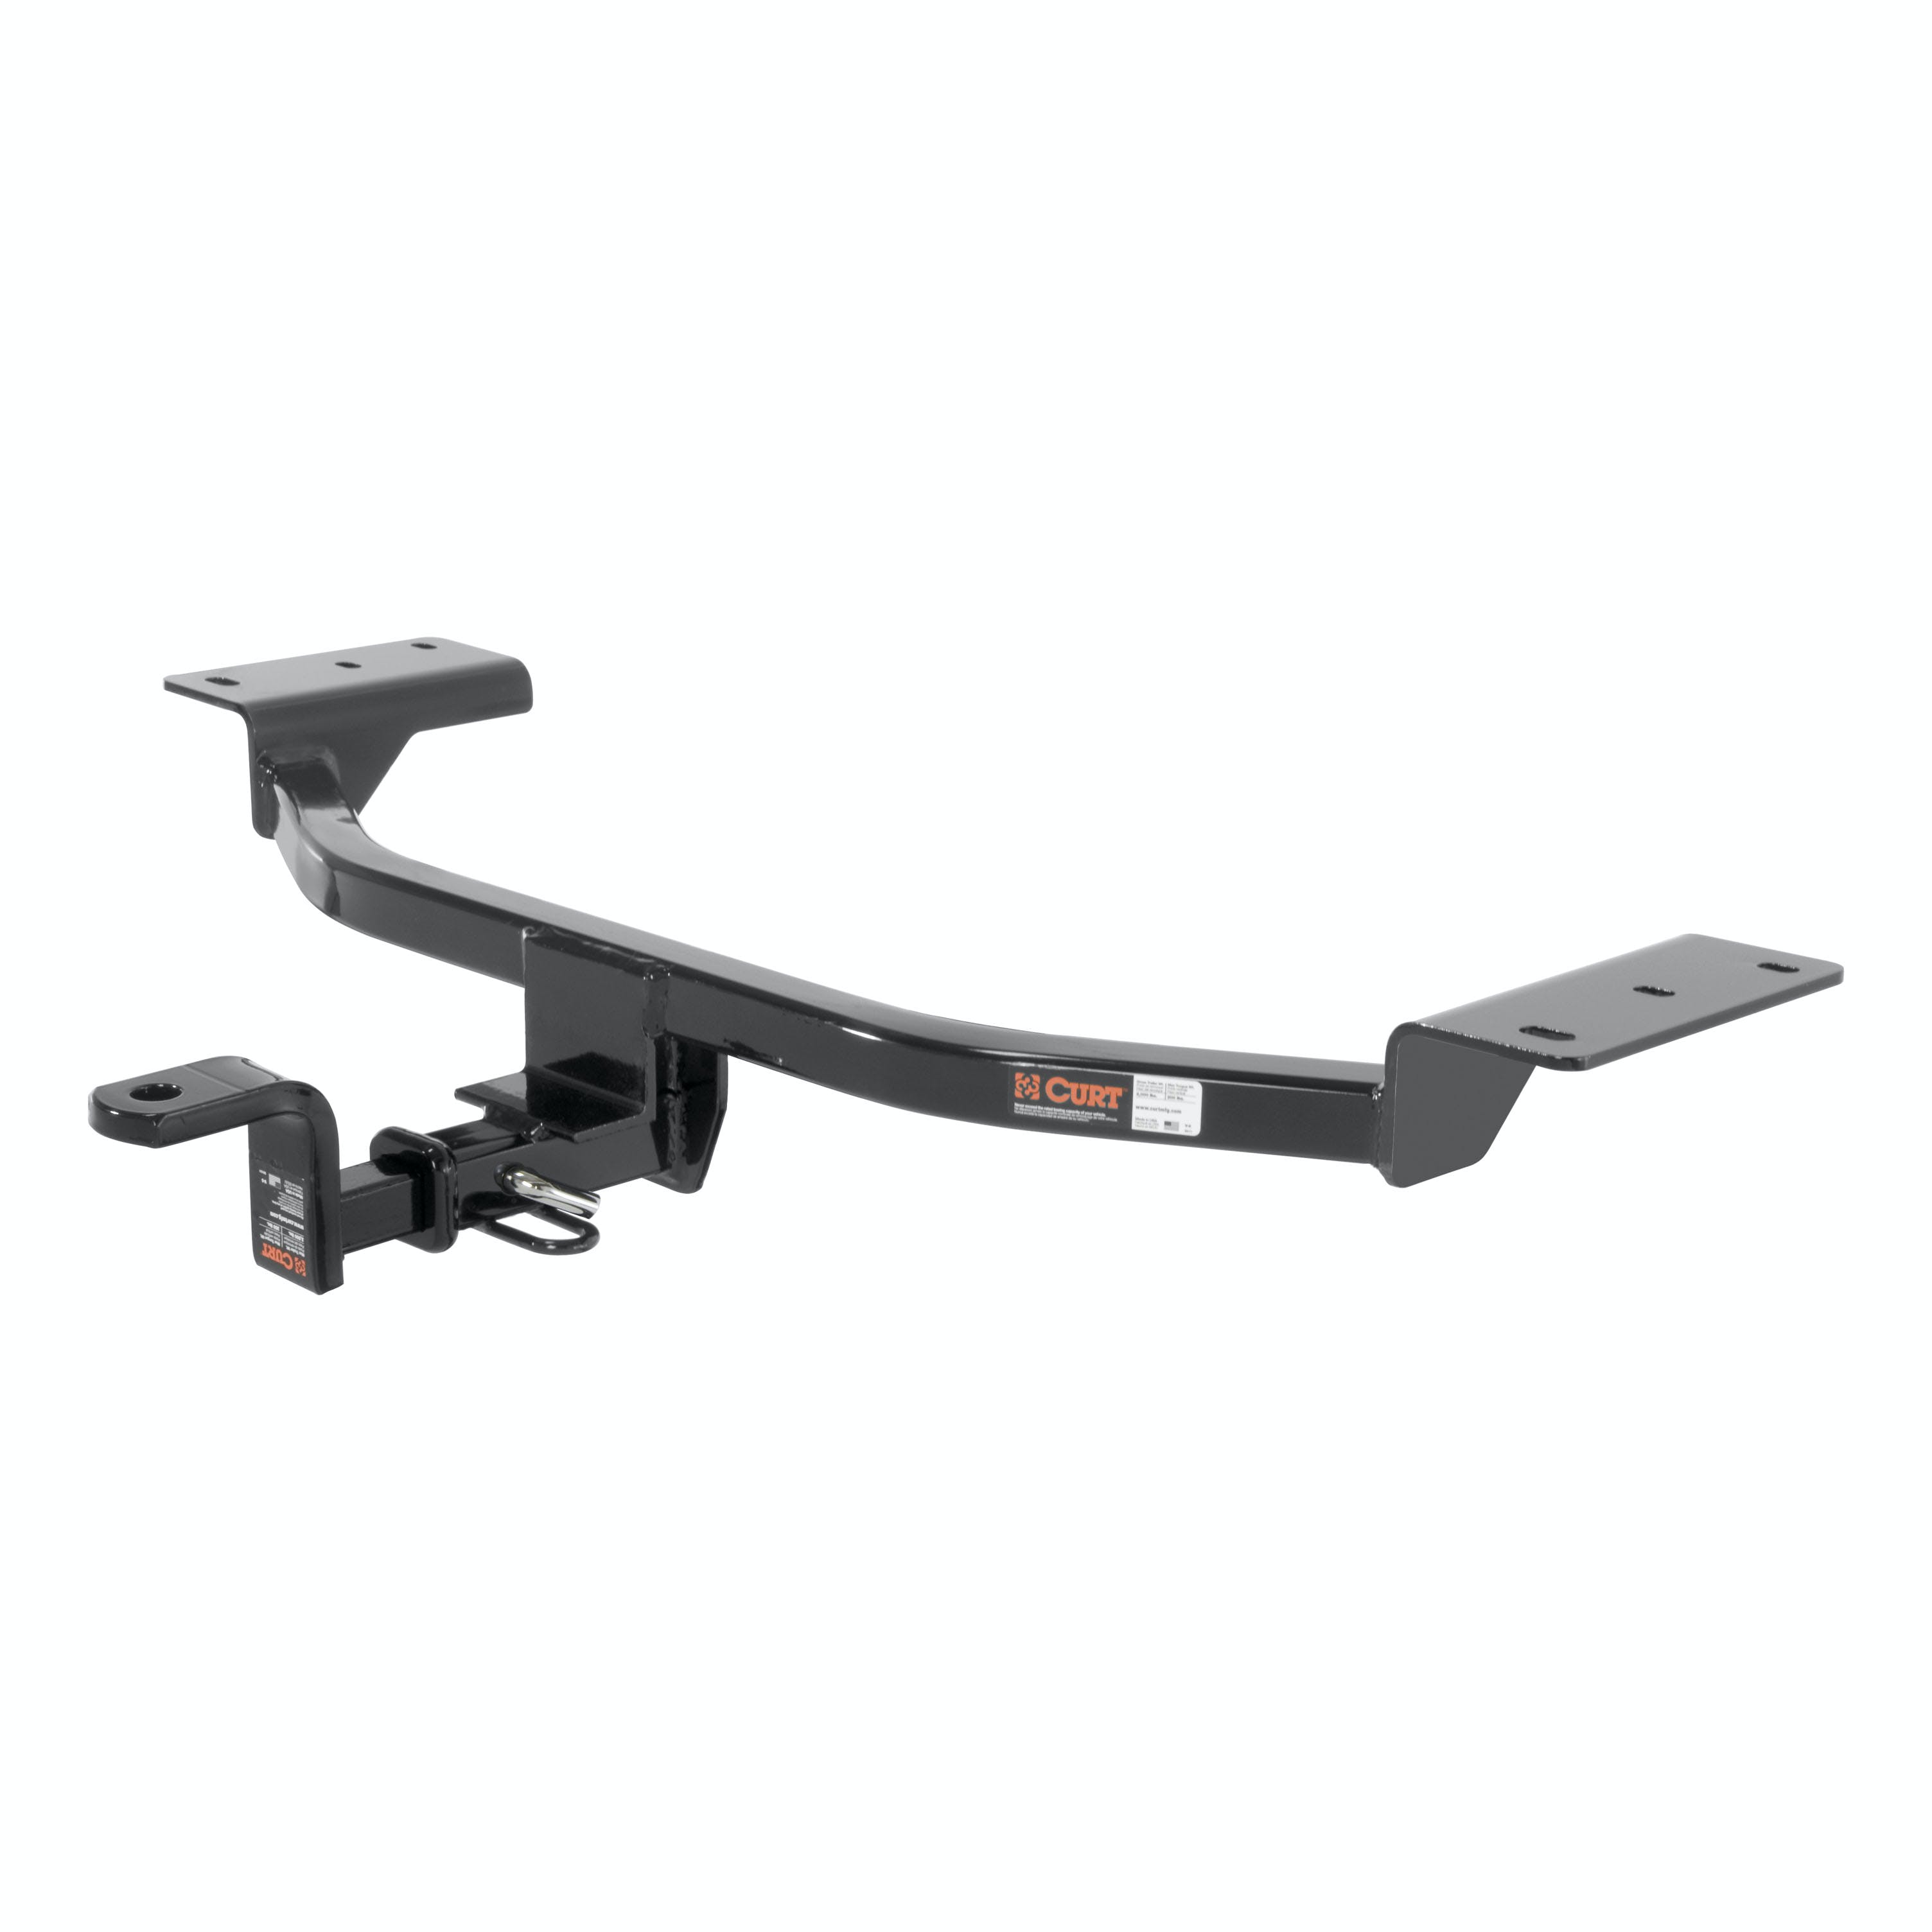 CURT 111583 Class 1 Trailer Hitch, 1-1/4 Ball Mount, Select Ford Focus